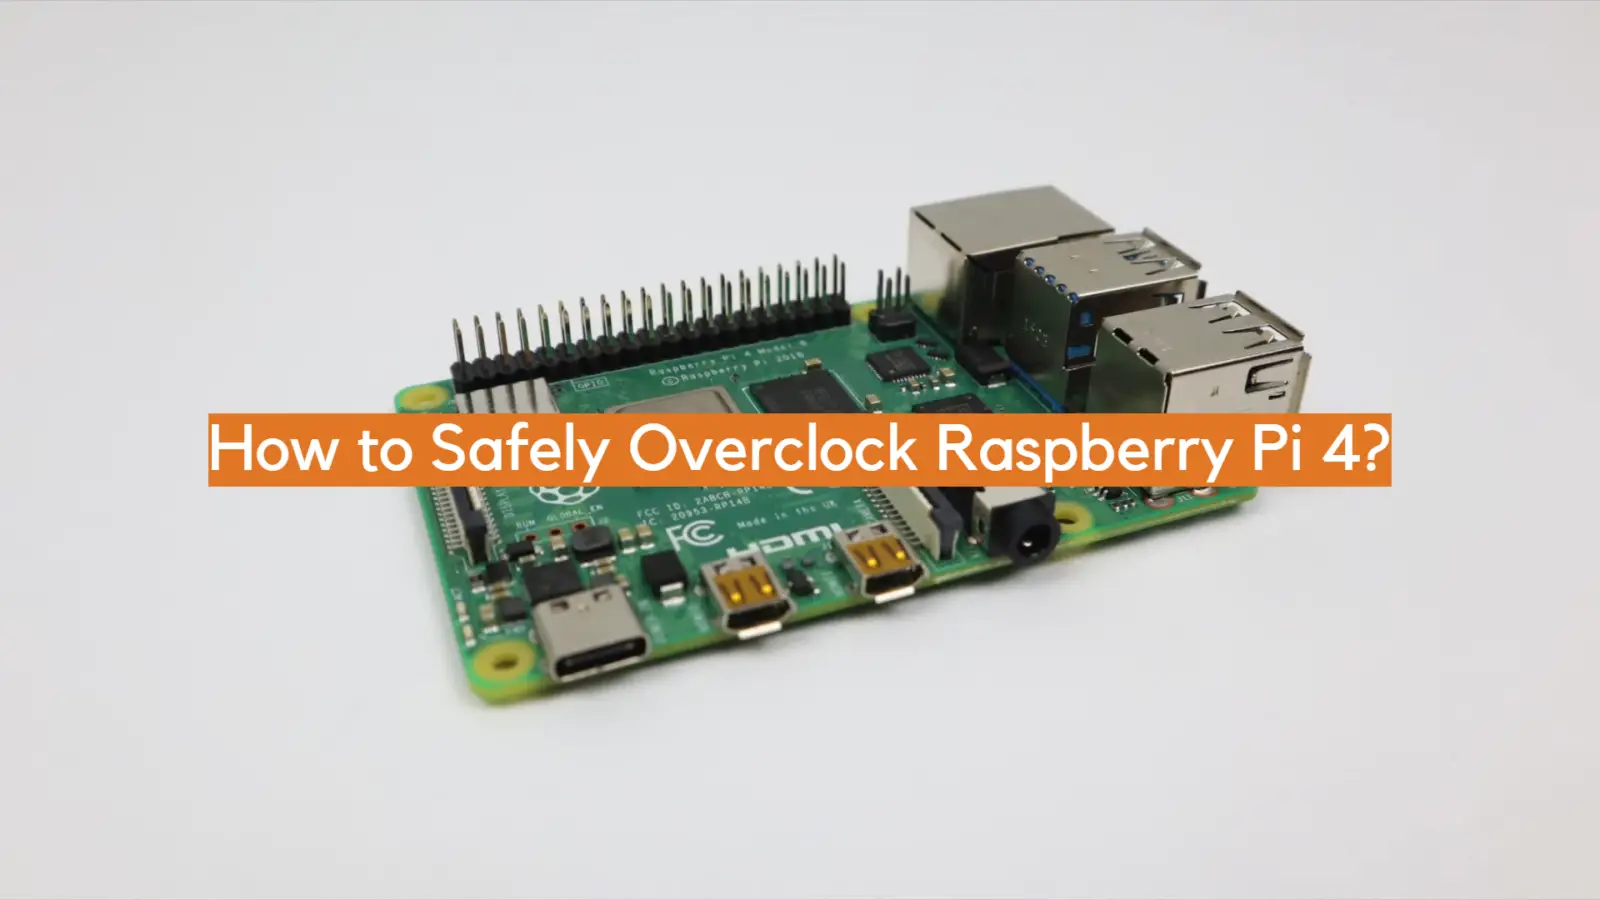 How to Safely Overclock Raspberry Pi 4?